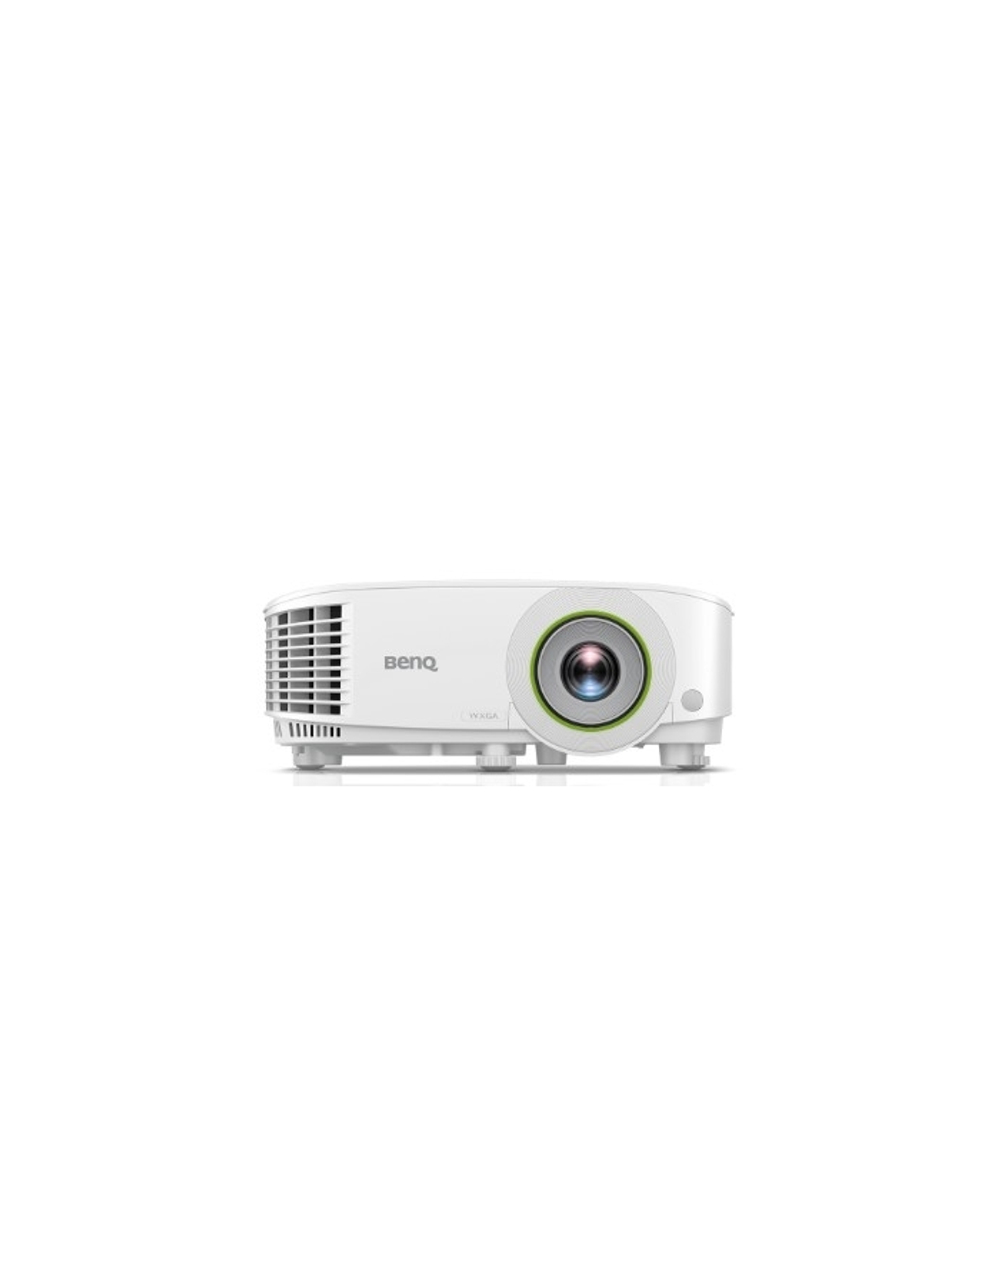 BenQ EW600 [9H.JLT77.13E] (DLP, 1280x800 WXGA, 3600 AL SMART, 1.1X, TR 1.55~1.7, HDMIx1, VGA, USBx2, wireless projection, 5G WiFi/BT, (USB dongle WDR02U inc) Android, 16GB/2GB, White)